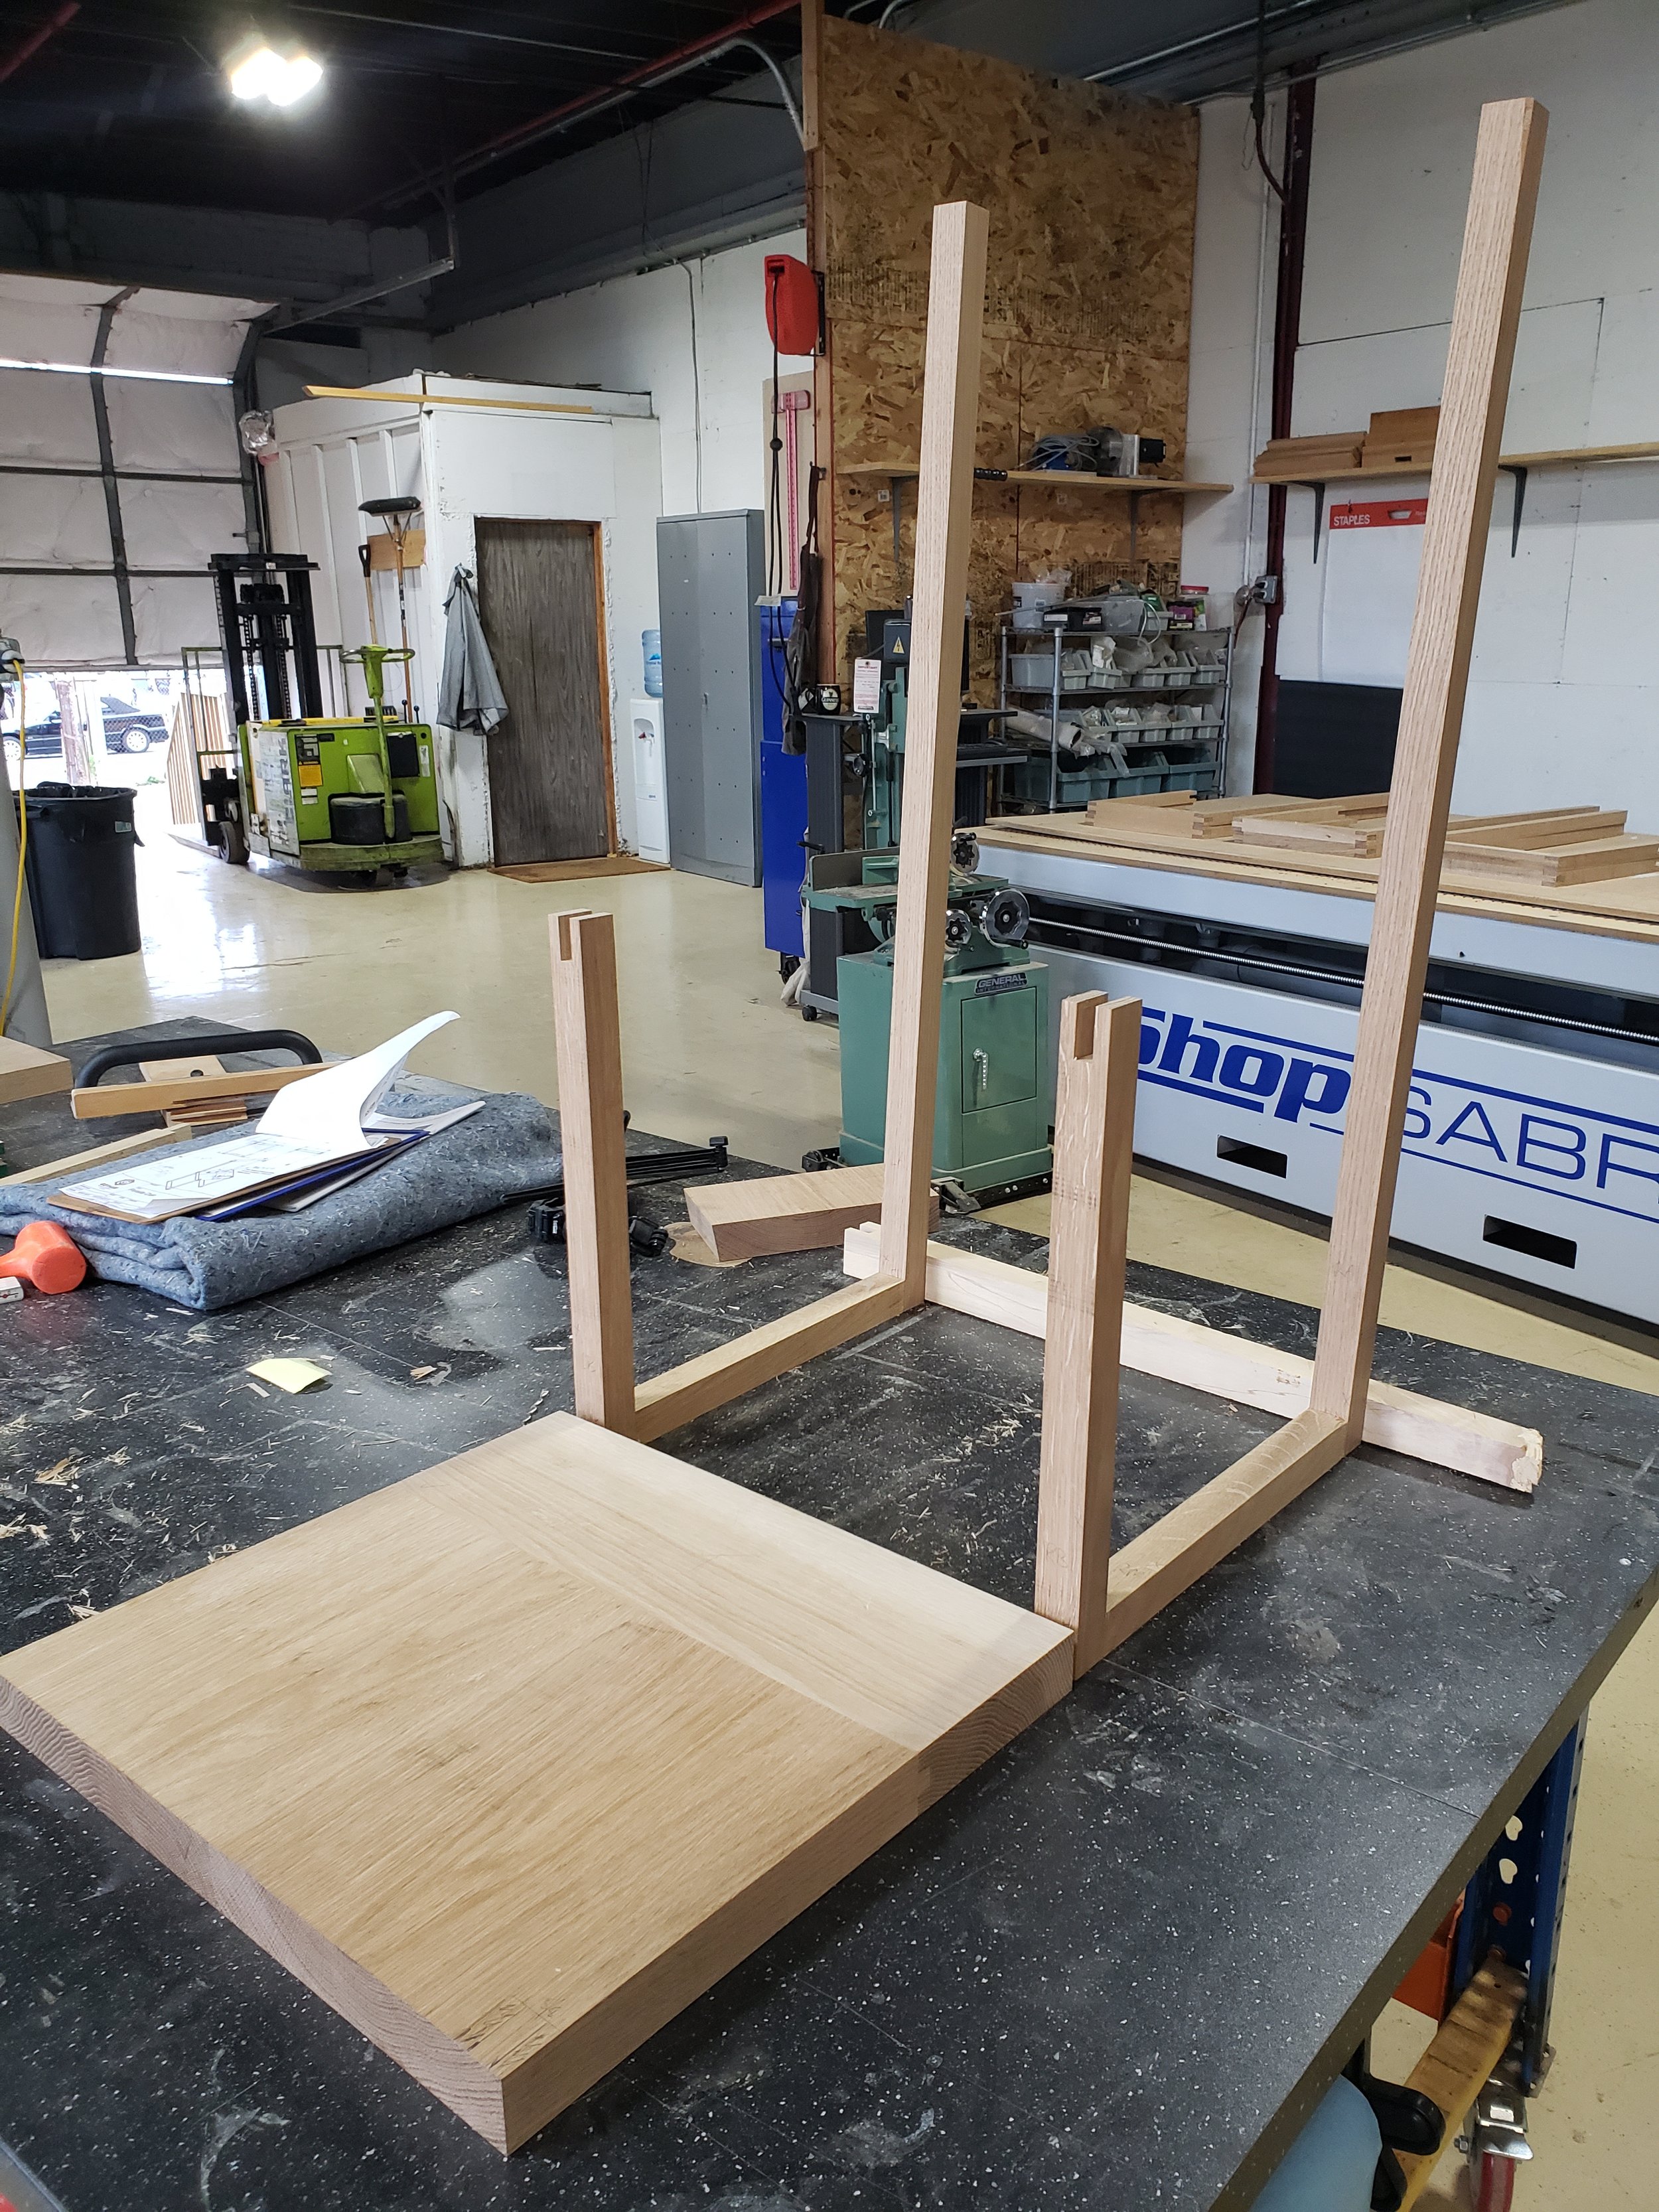 Seat ready for assembly